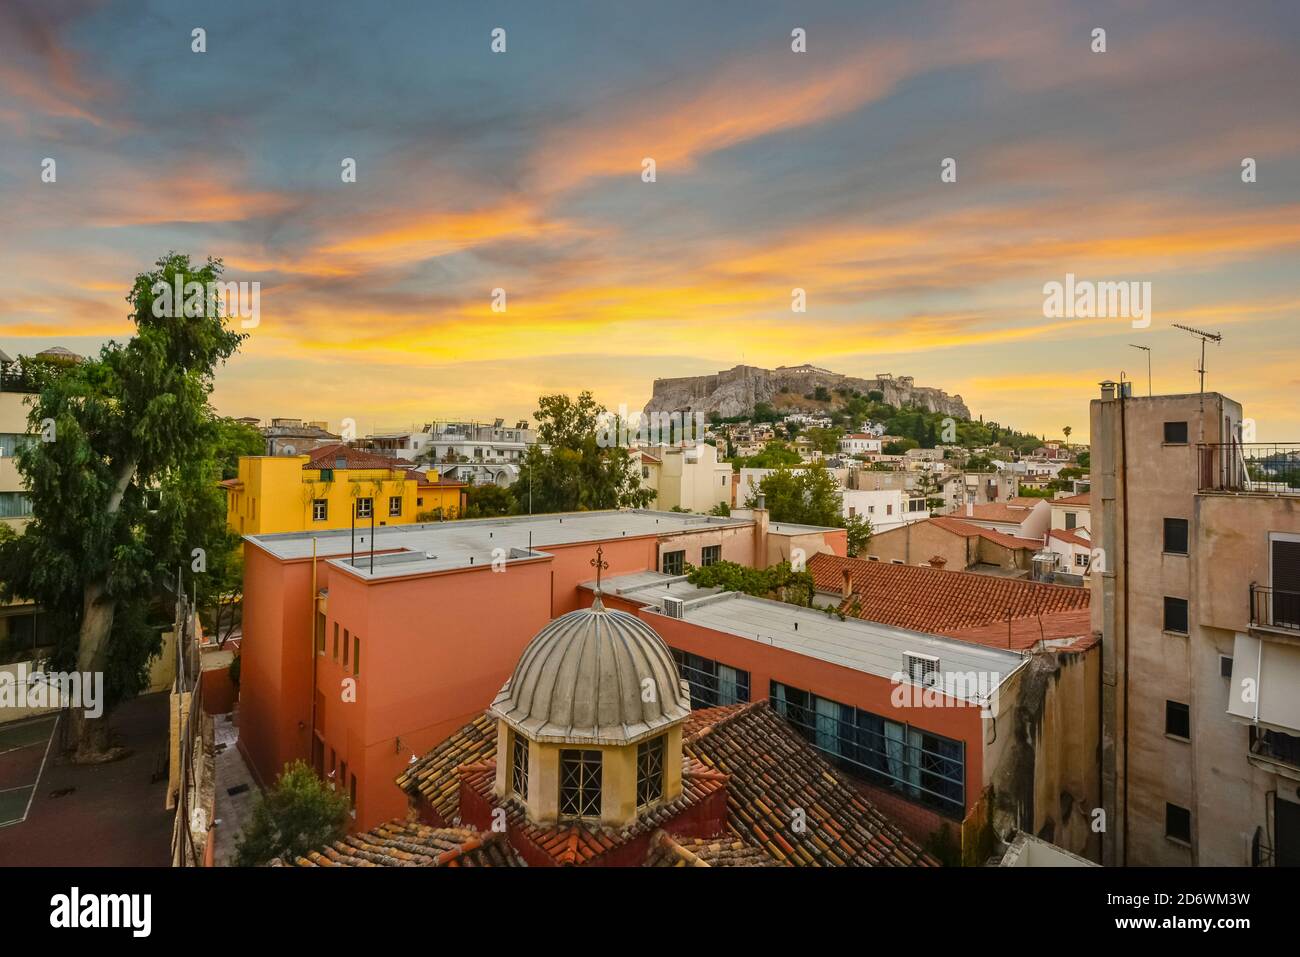 The ancient Acropolis and Parthenon on Acropolis hill viewed from the Plaka region below in the city of Athens, Greece at sunset. Stock Photo